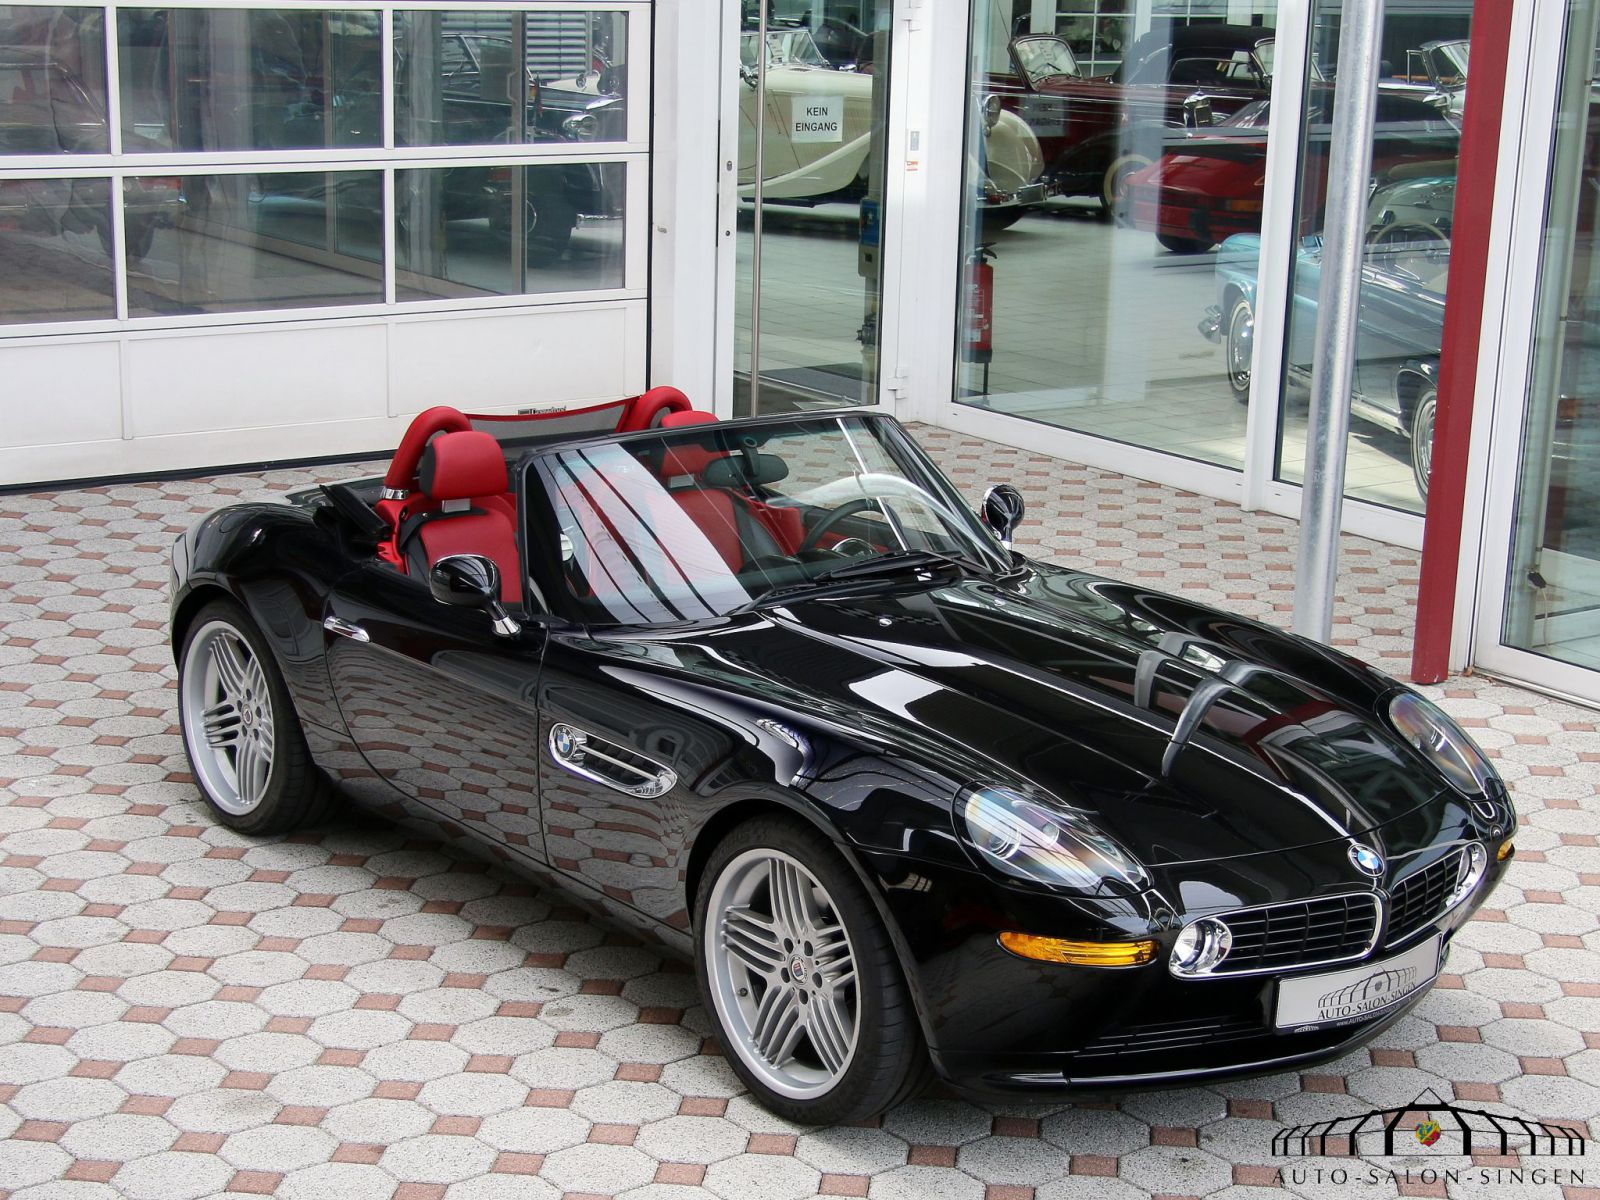 Alpina Z8 Roadster Might Be Worth the $440,000